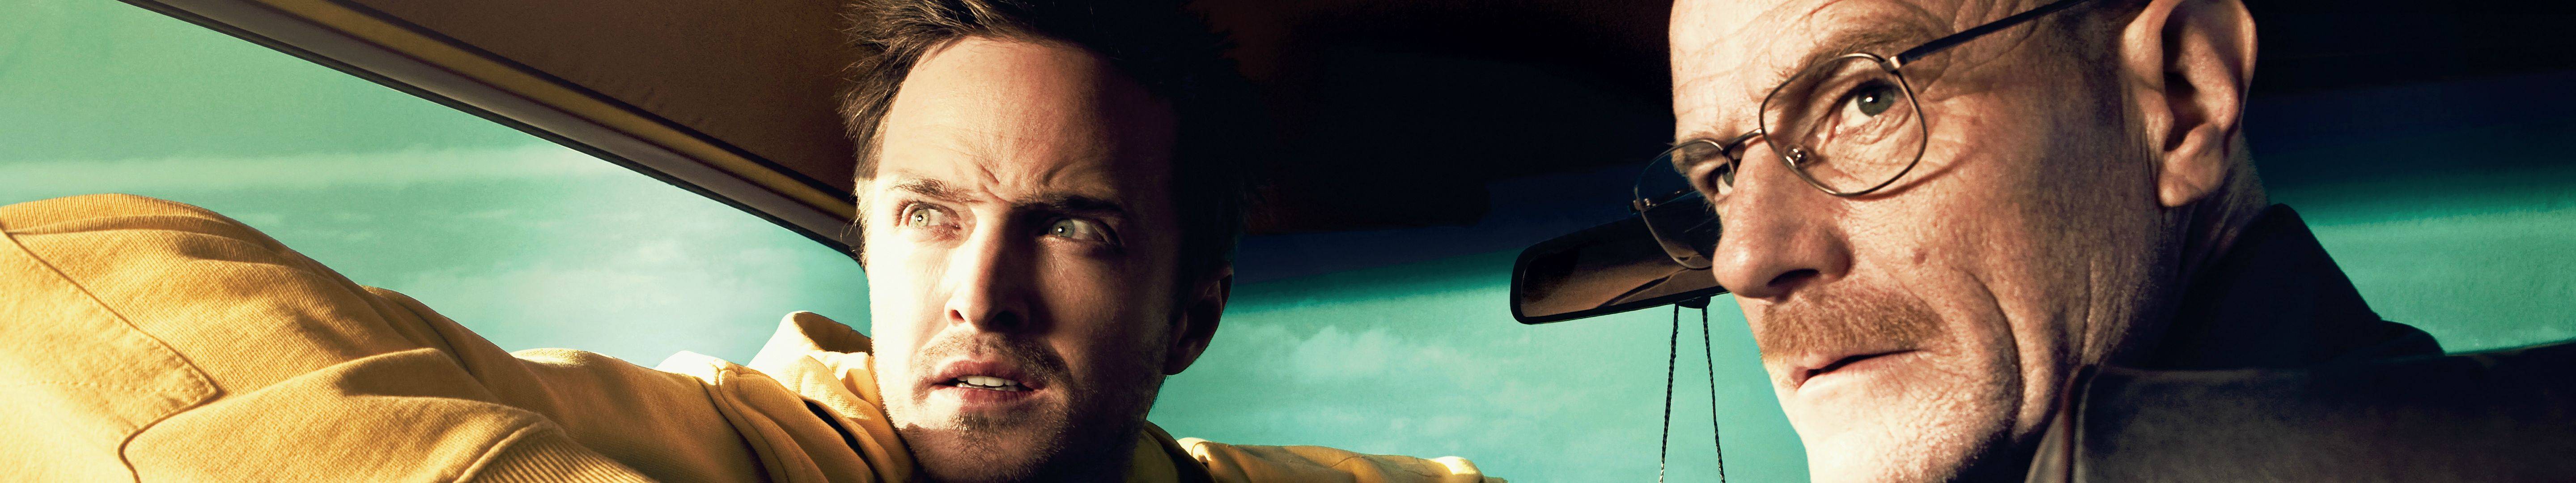 breaking bad, tv show, aaron paul, bryan cranston, jesse pinkman, walter white for android